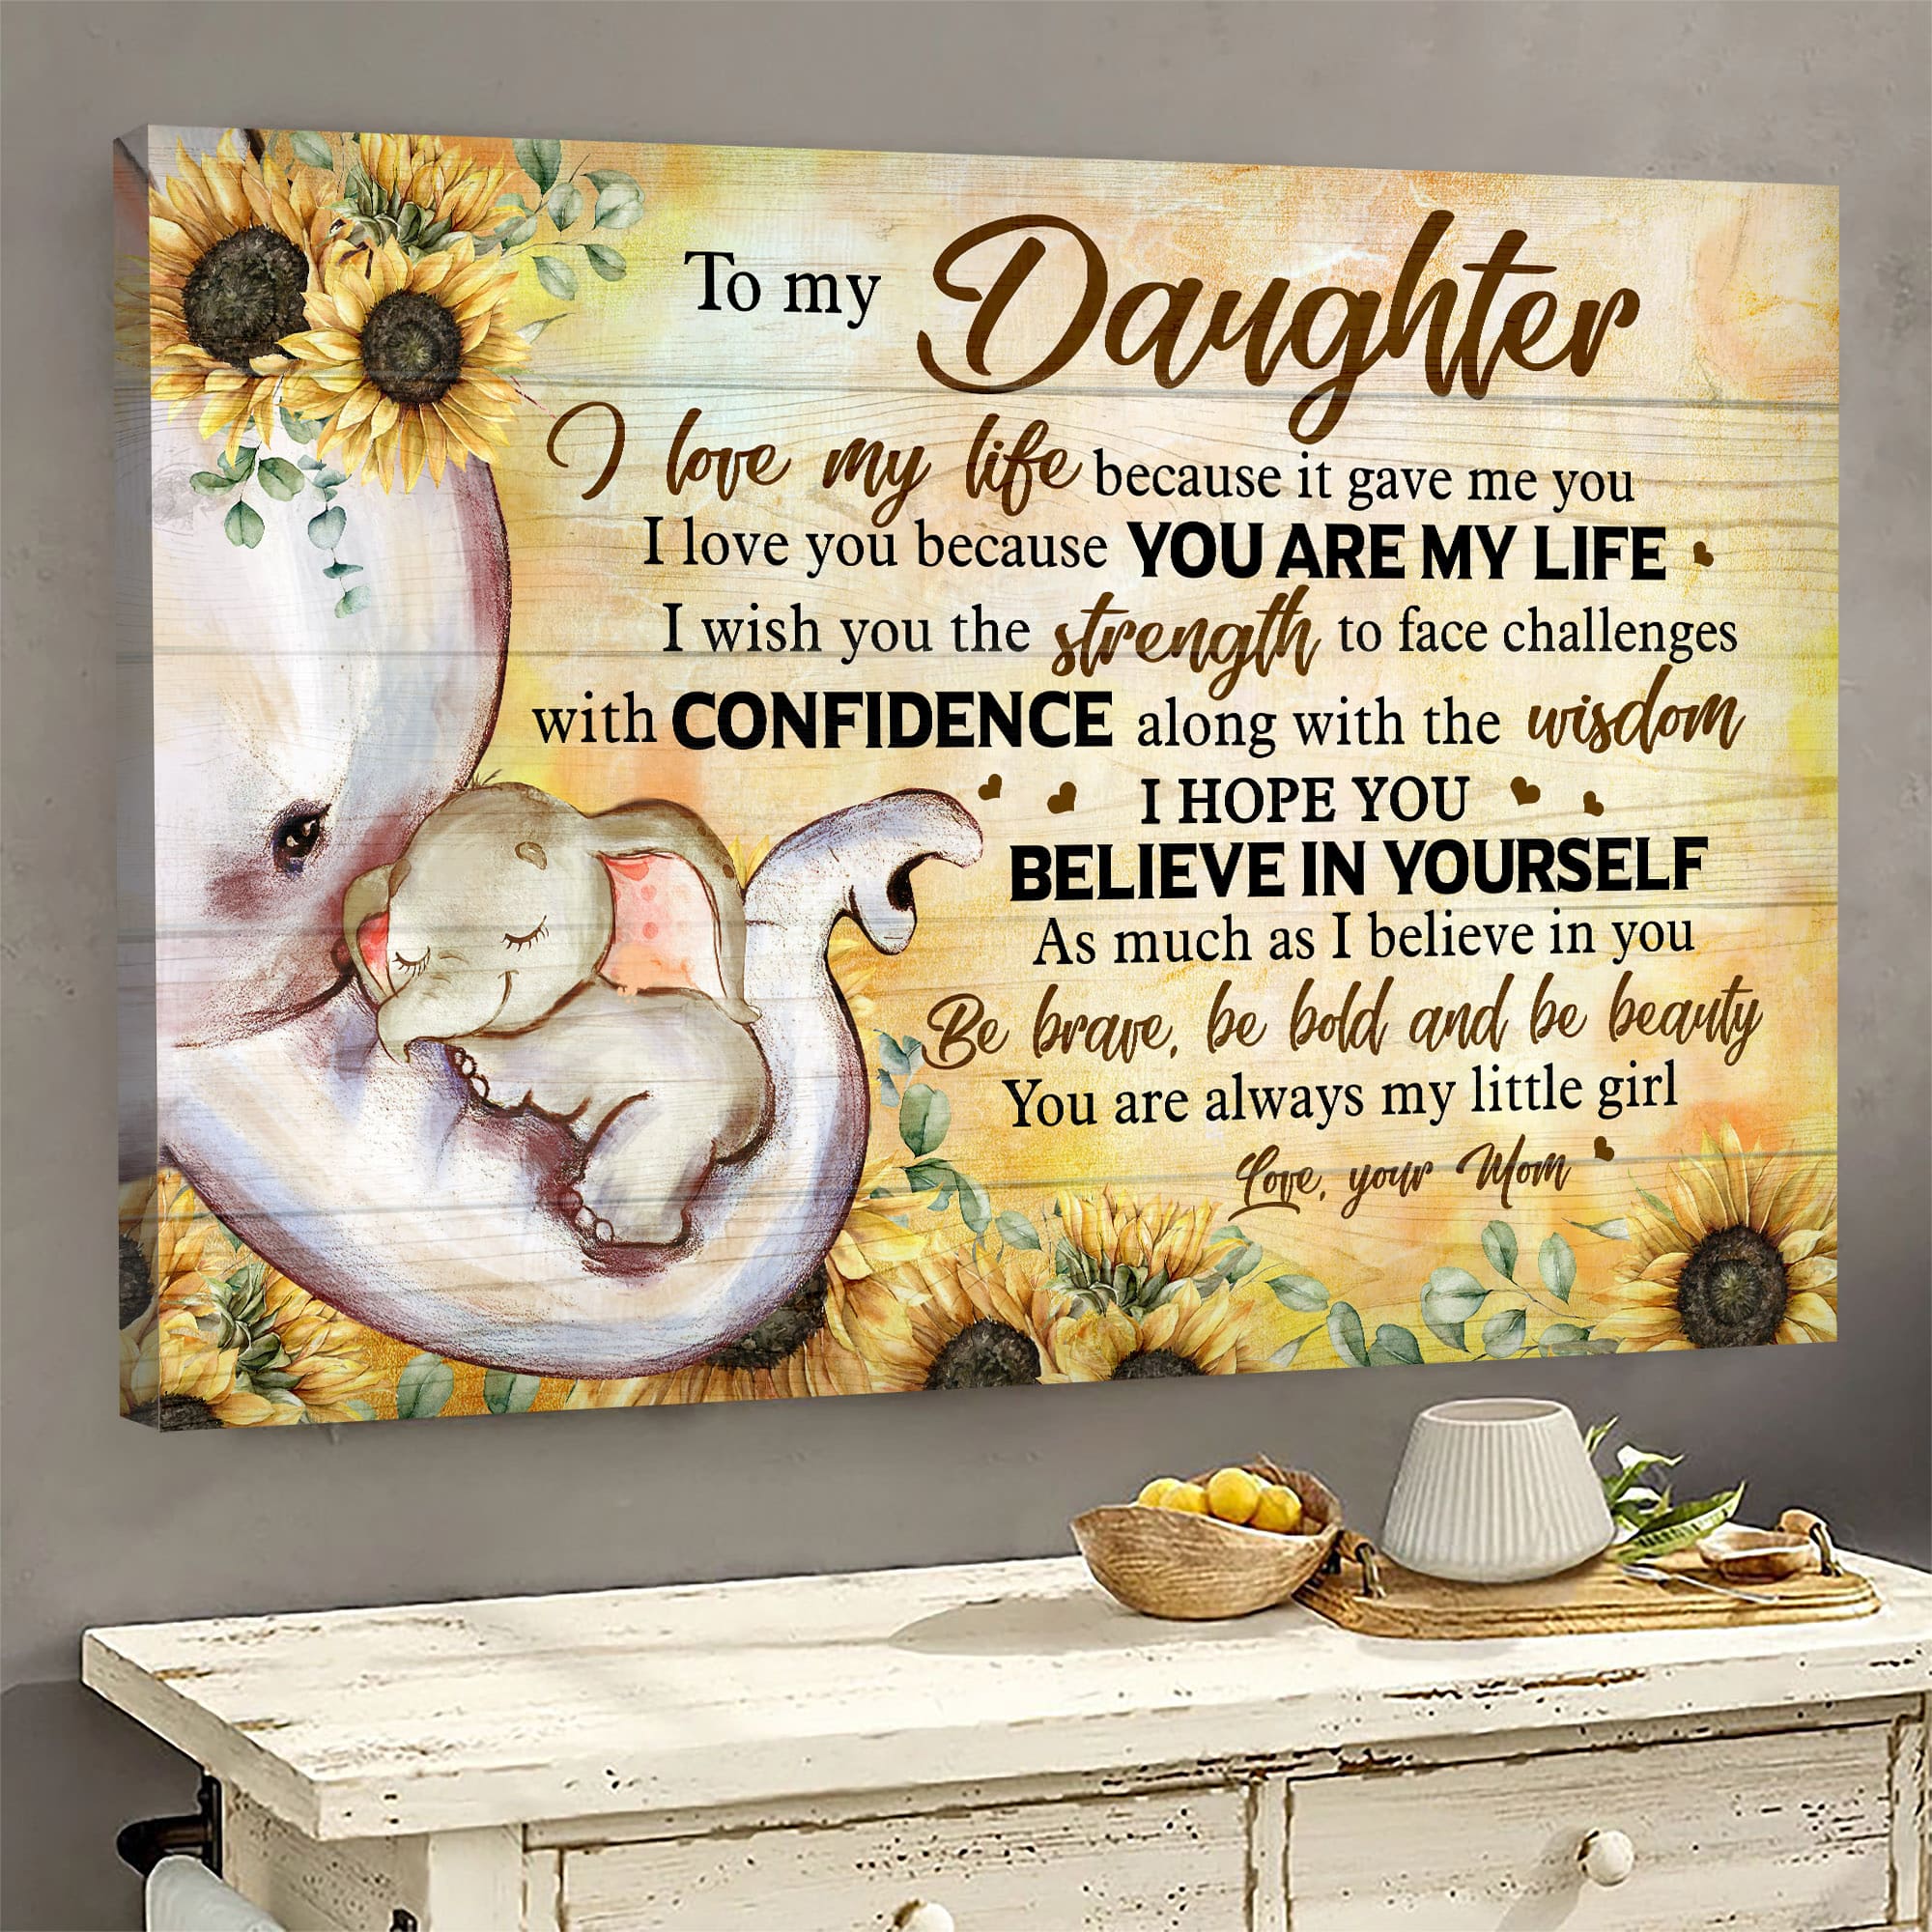 Mom To Daughter, Elephant, Sunflower, I hope you believe in yourself like I do - Family Landscape Canvas Prints, Wall Art